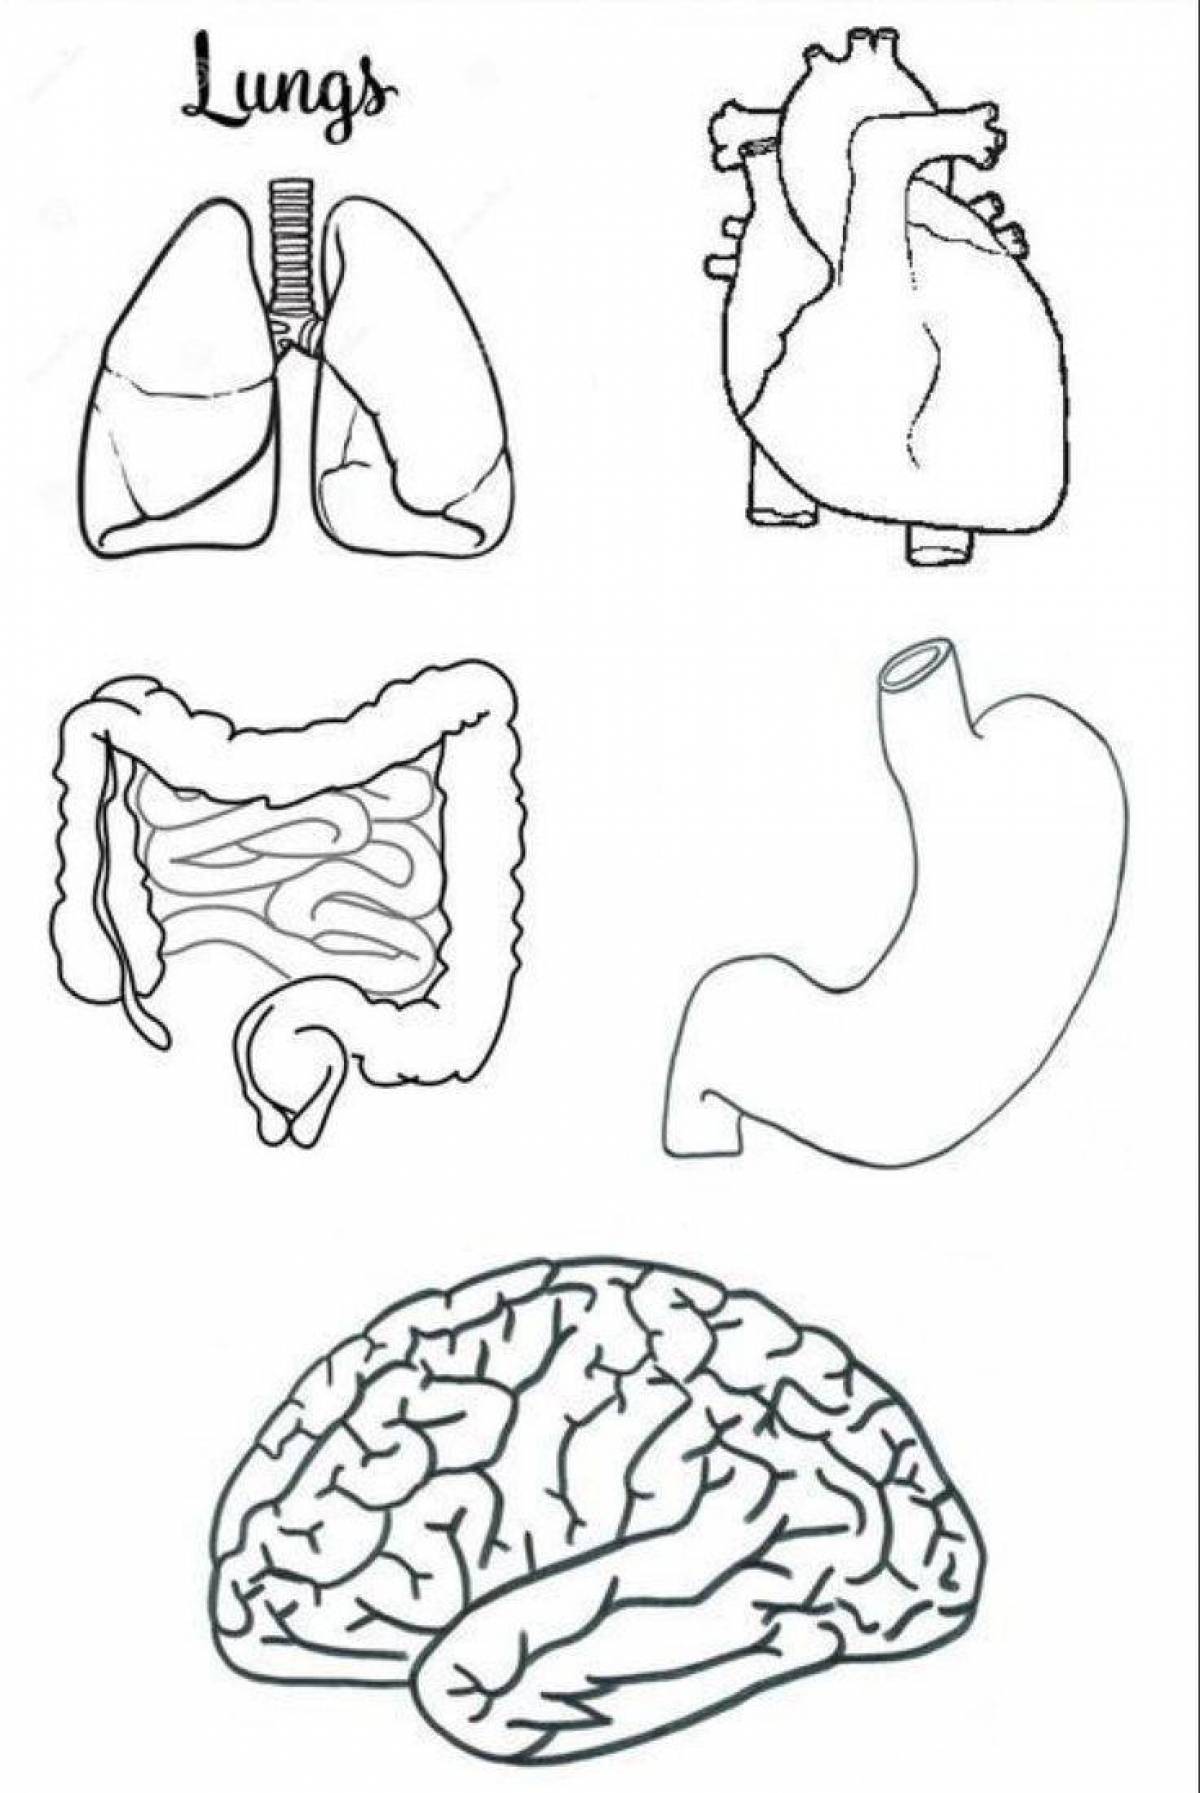 Stimulating coloring pages of human organs